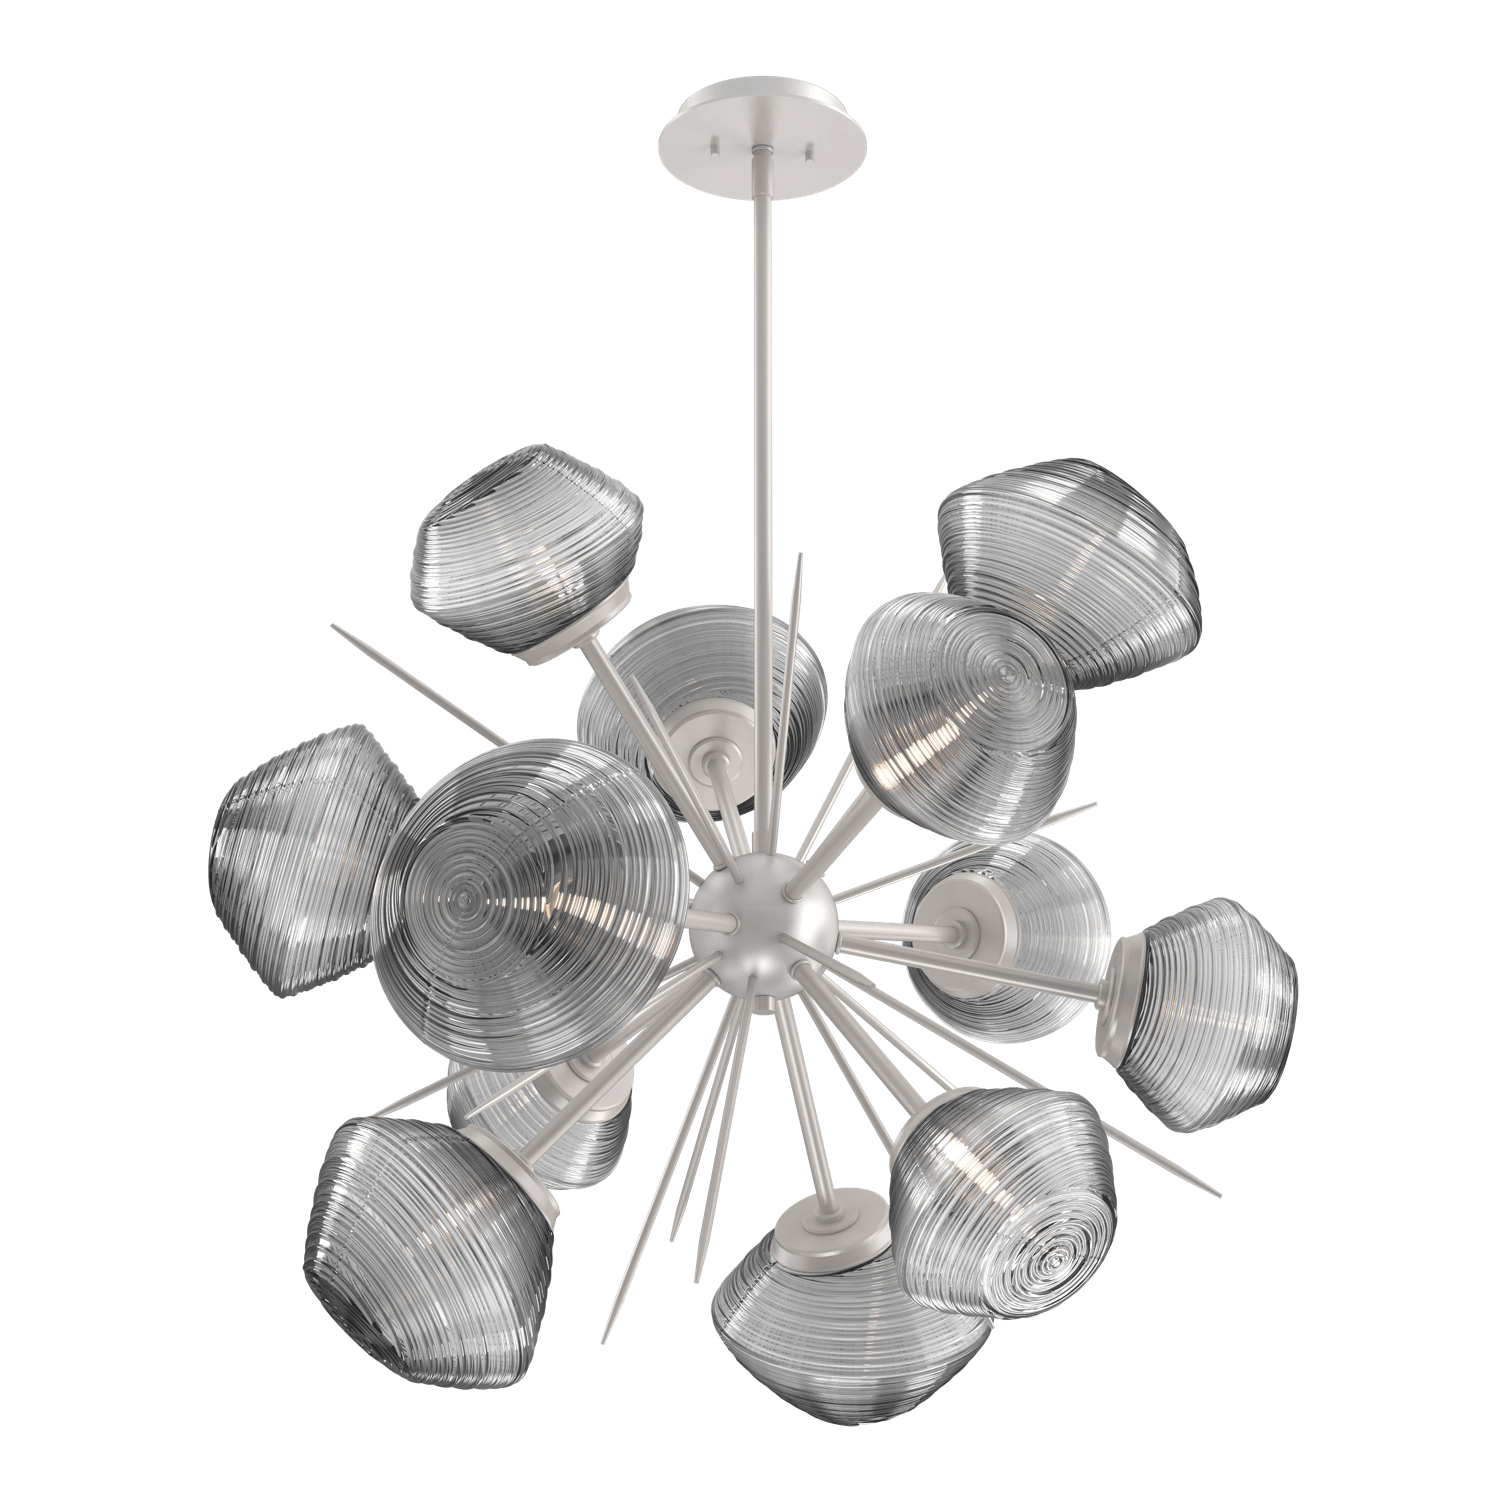 CHB0089-0G-BS-S-Hammerton-Studio-Mesa-36-inch-starburst-chandelier-with-metallic-beige-silver-finish-and-smoke-blown-glass-shades-and-LED-lamping